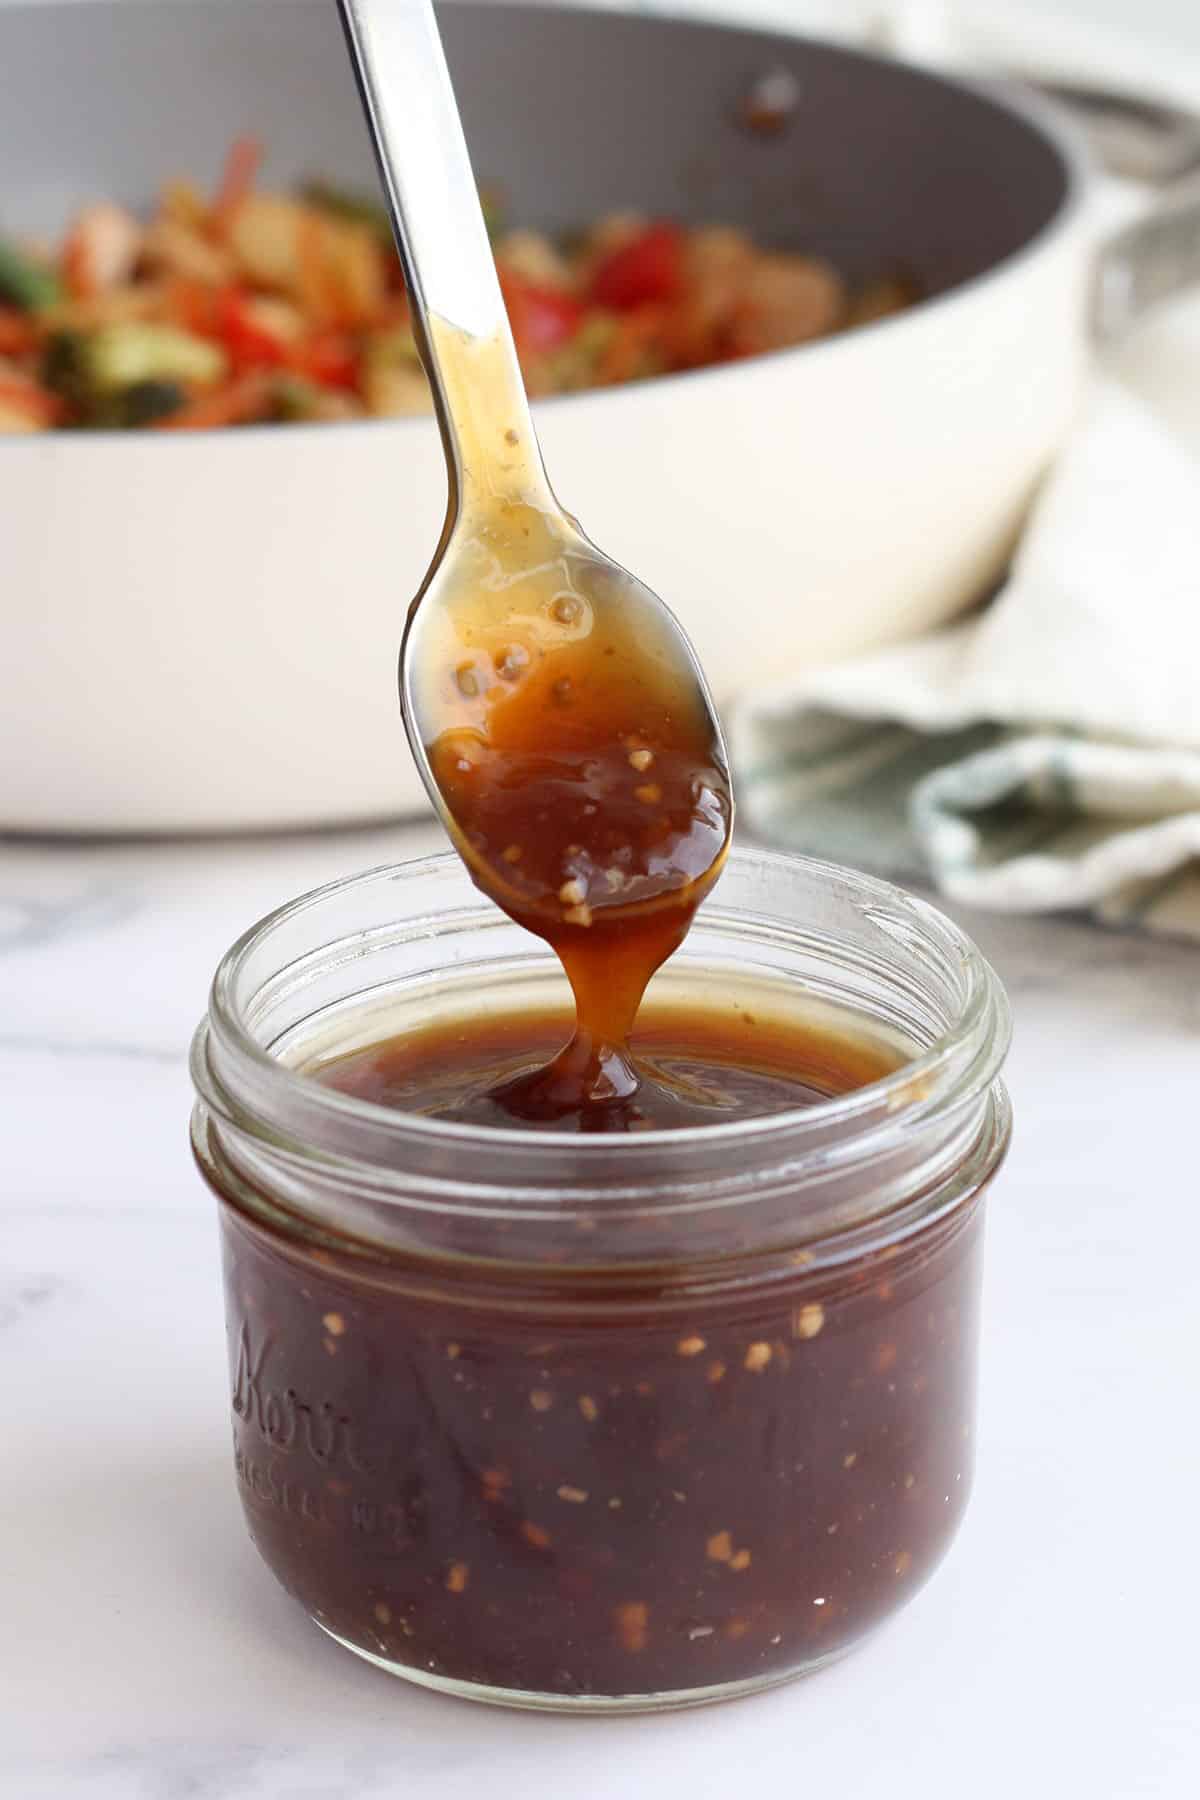 homemade stir fry sauce in a glass jar with a spoon